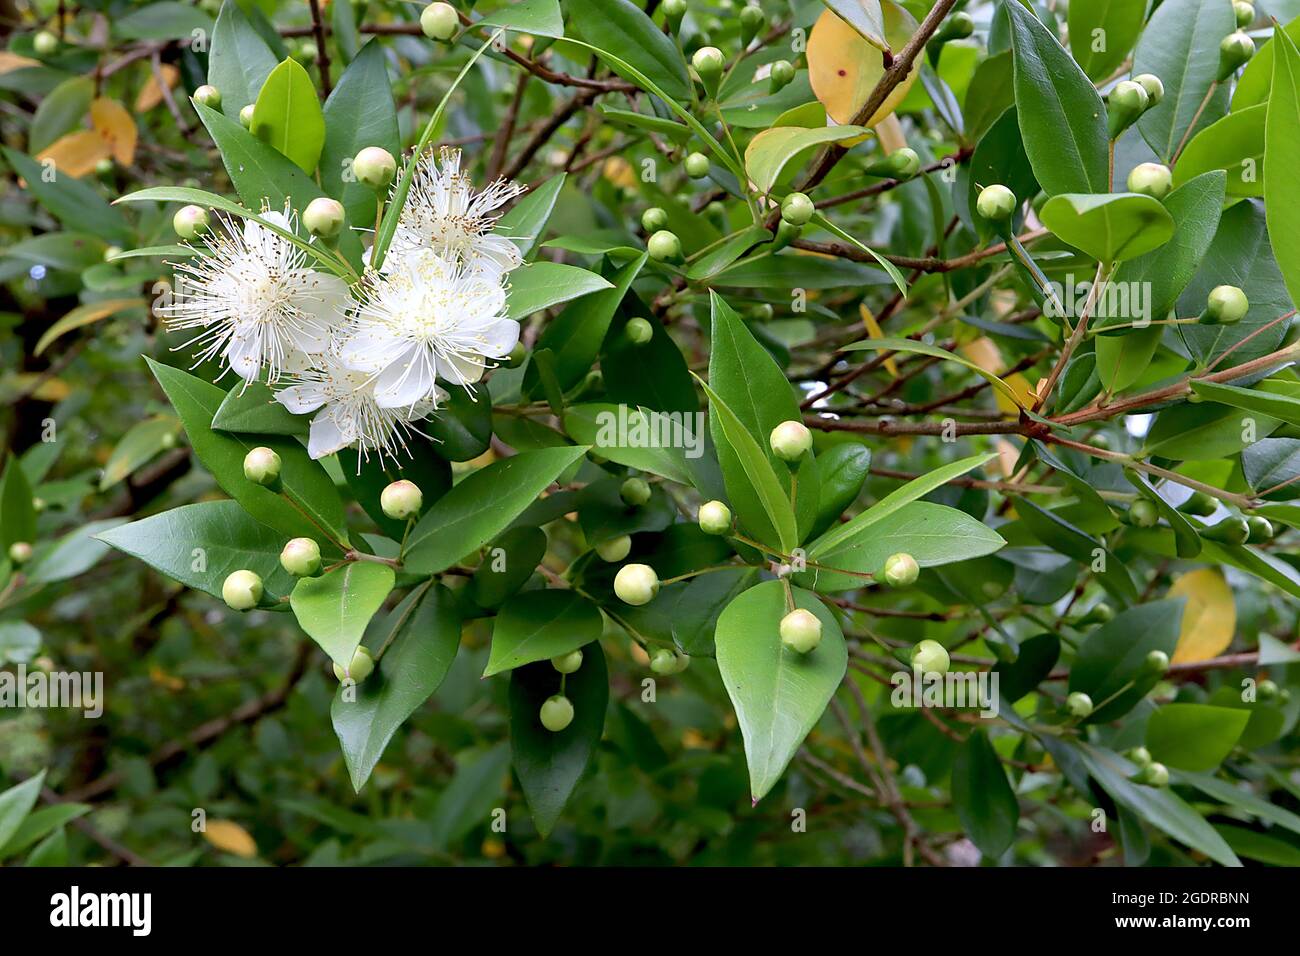 Myrtus communis common myrtle - white bowl-shaped flowers with multiple yellow-tipped stamens and glossy leaves,  July, England, UK Stock Photo